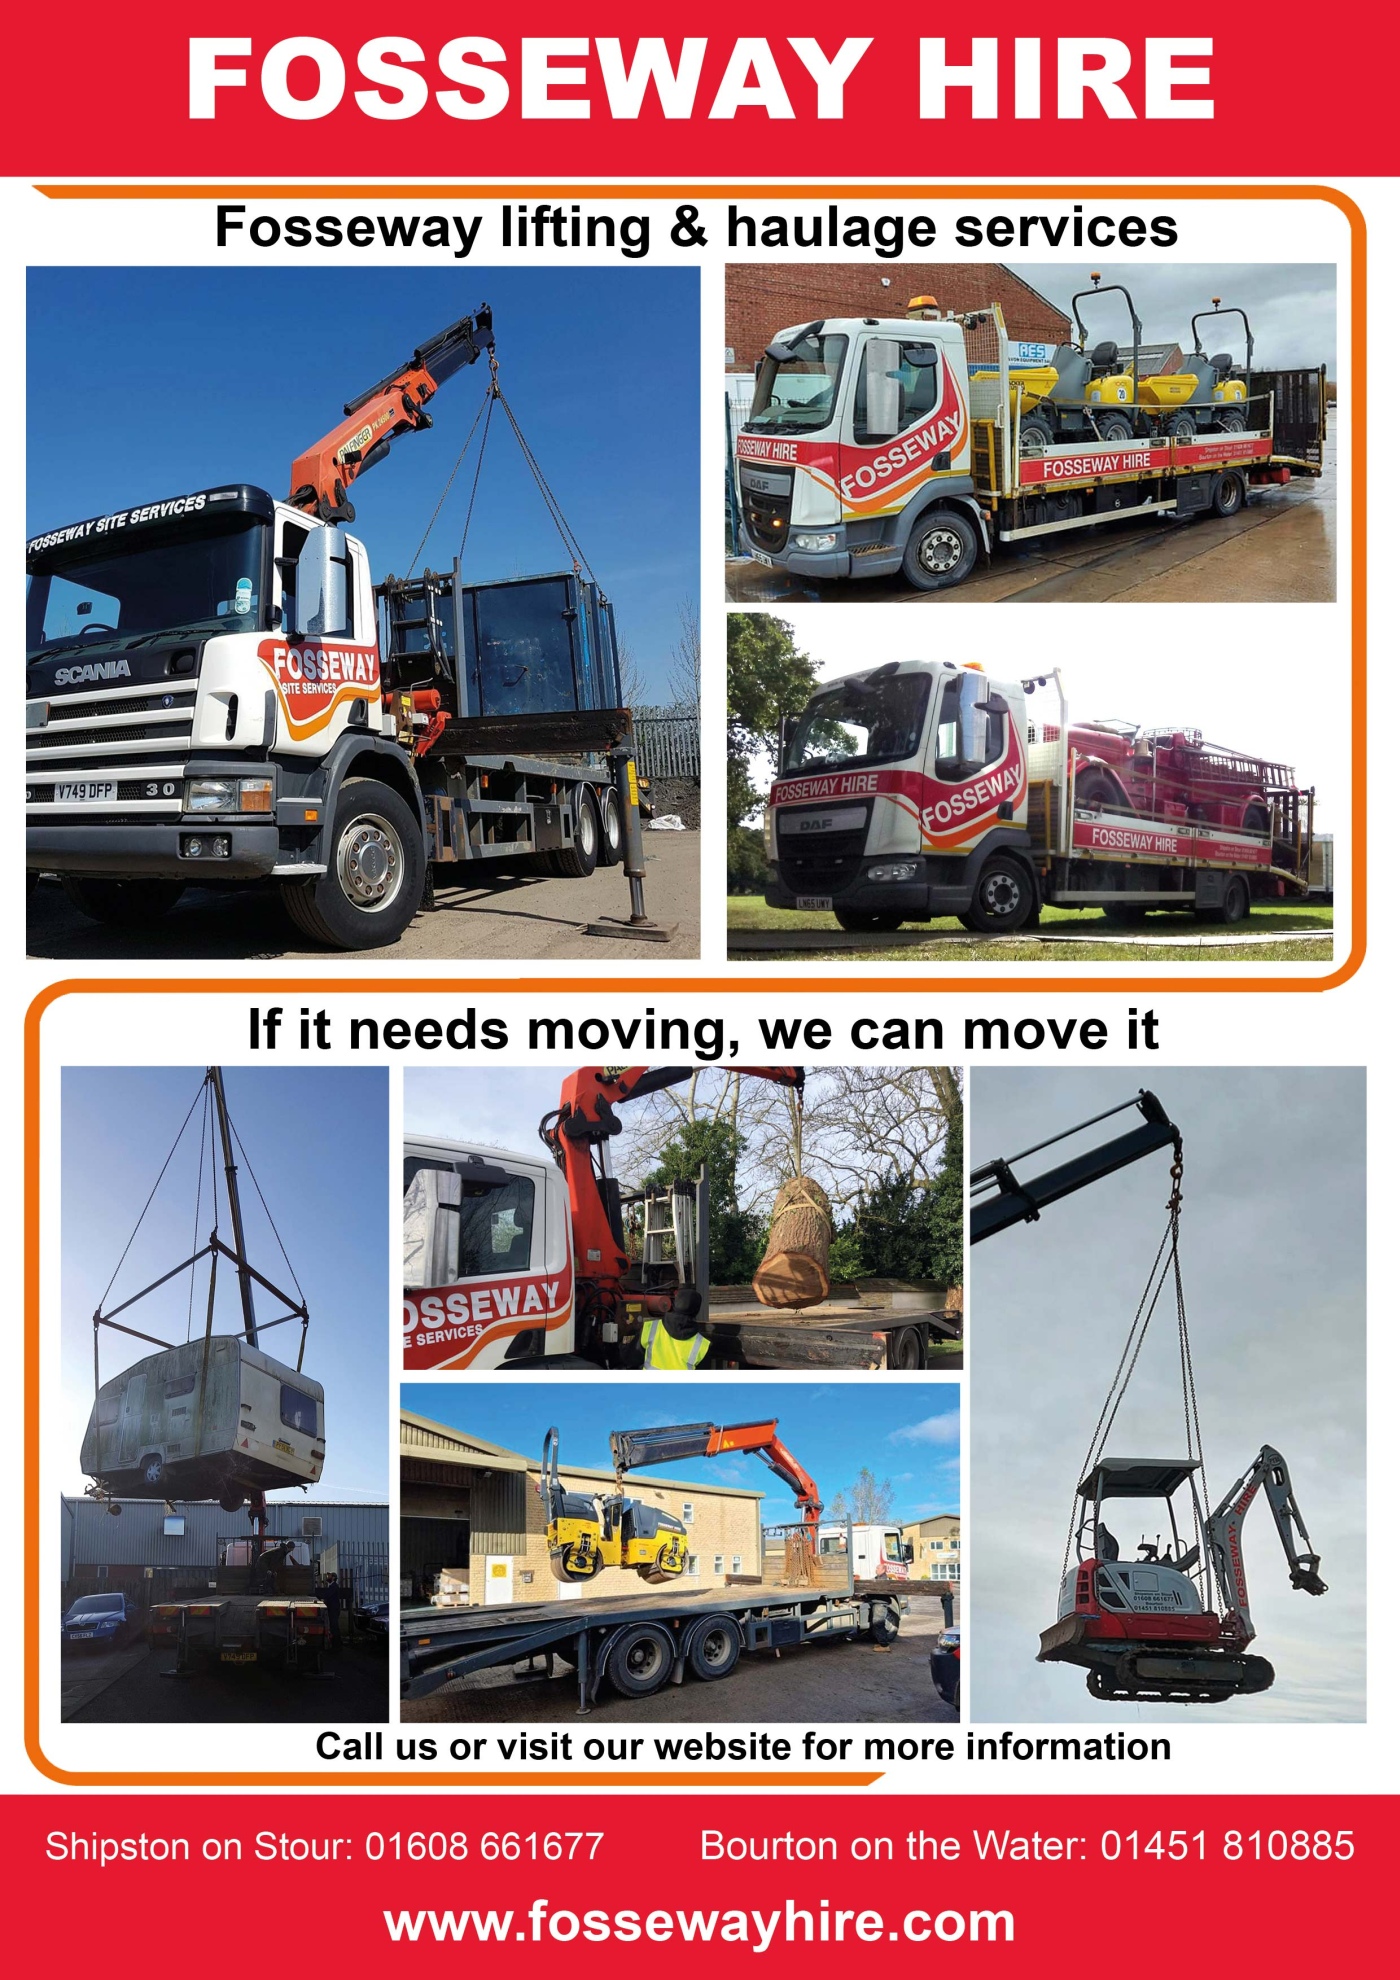 Warwickshire Haulage Company Delivery, Haulage, on Site Lifting Services